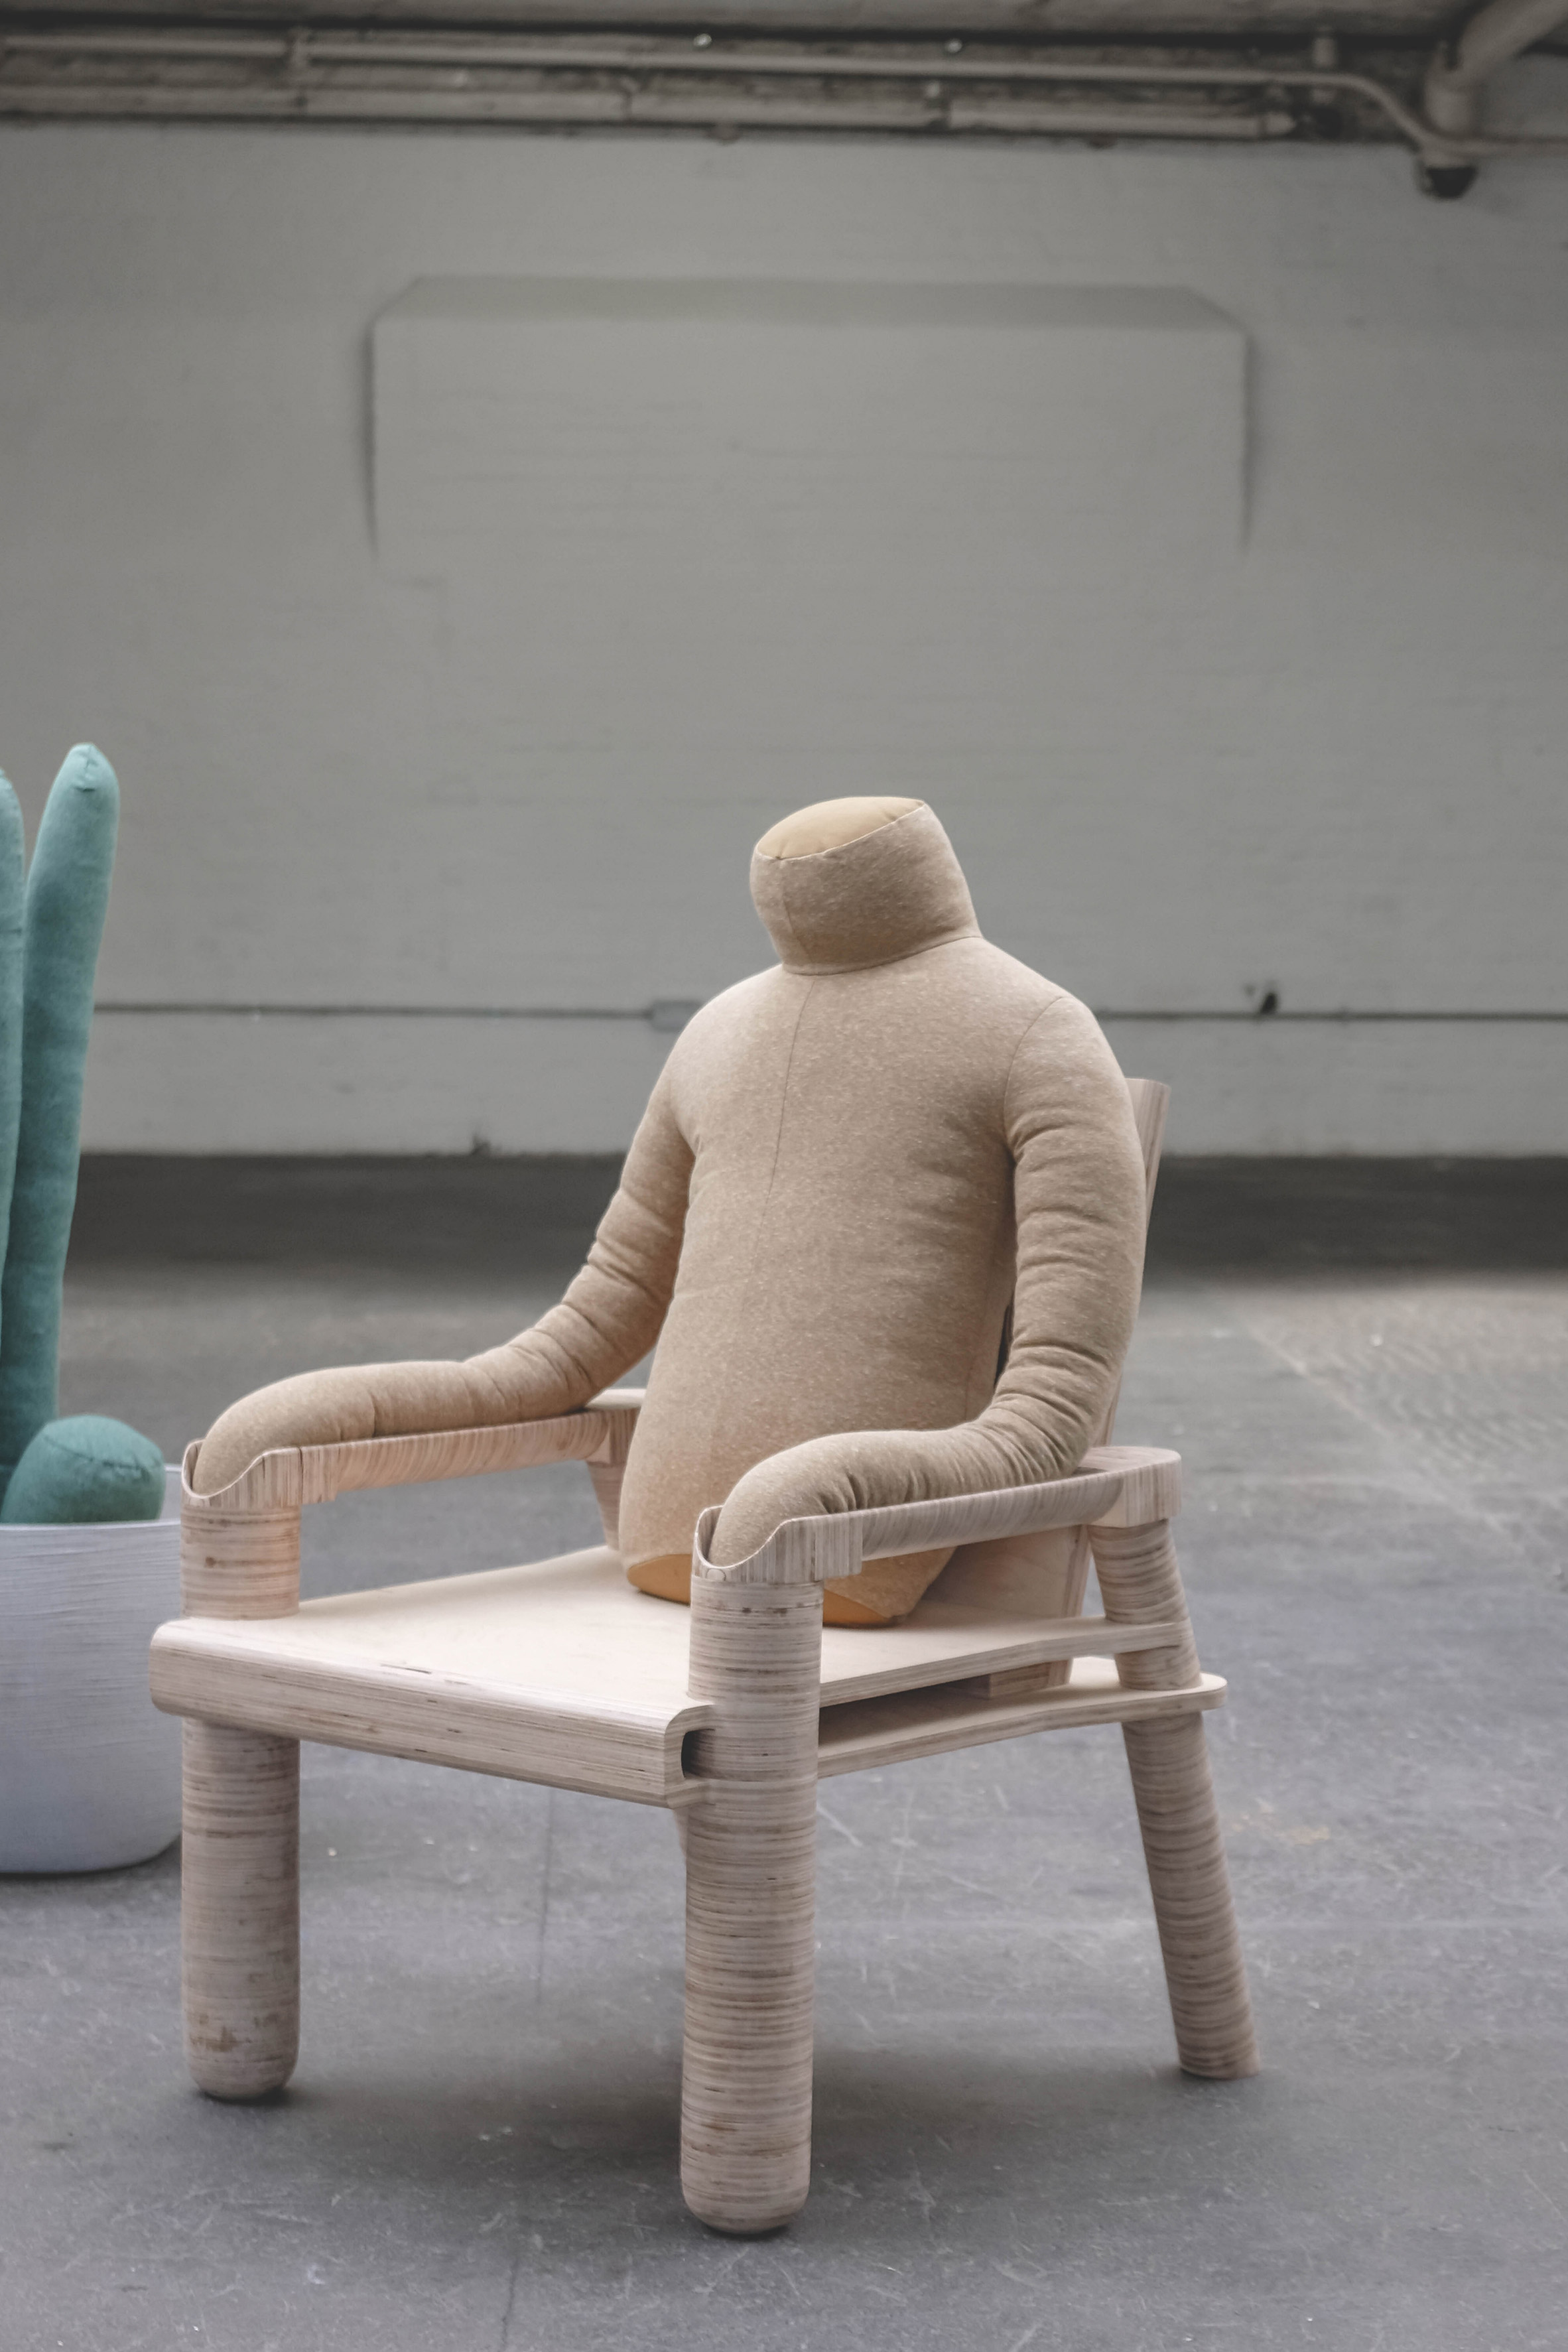 Headless human-shaped pillow by Aseptic Studio designed to reduce urban loneliness